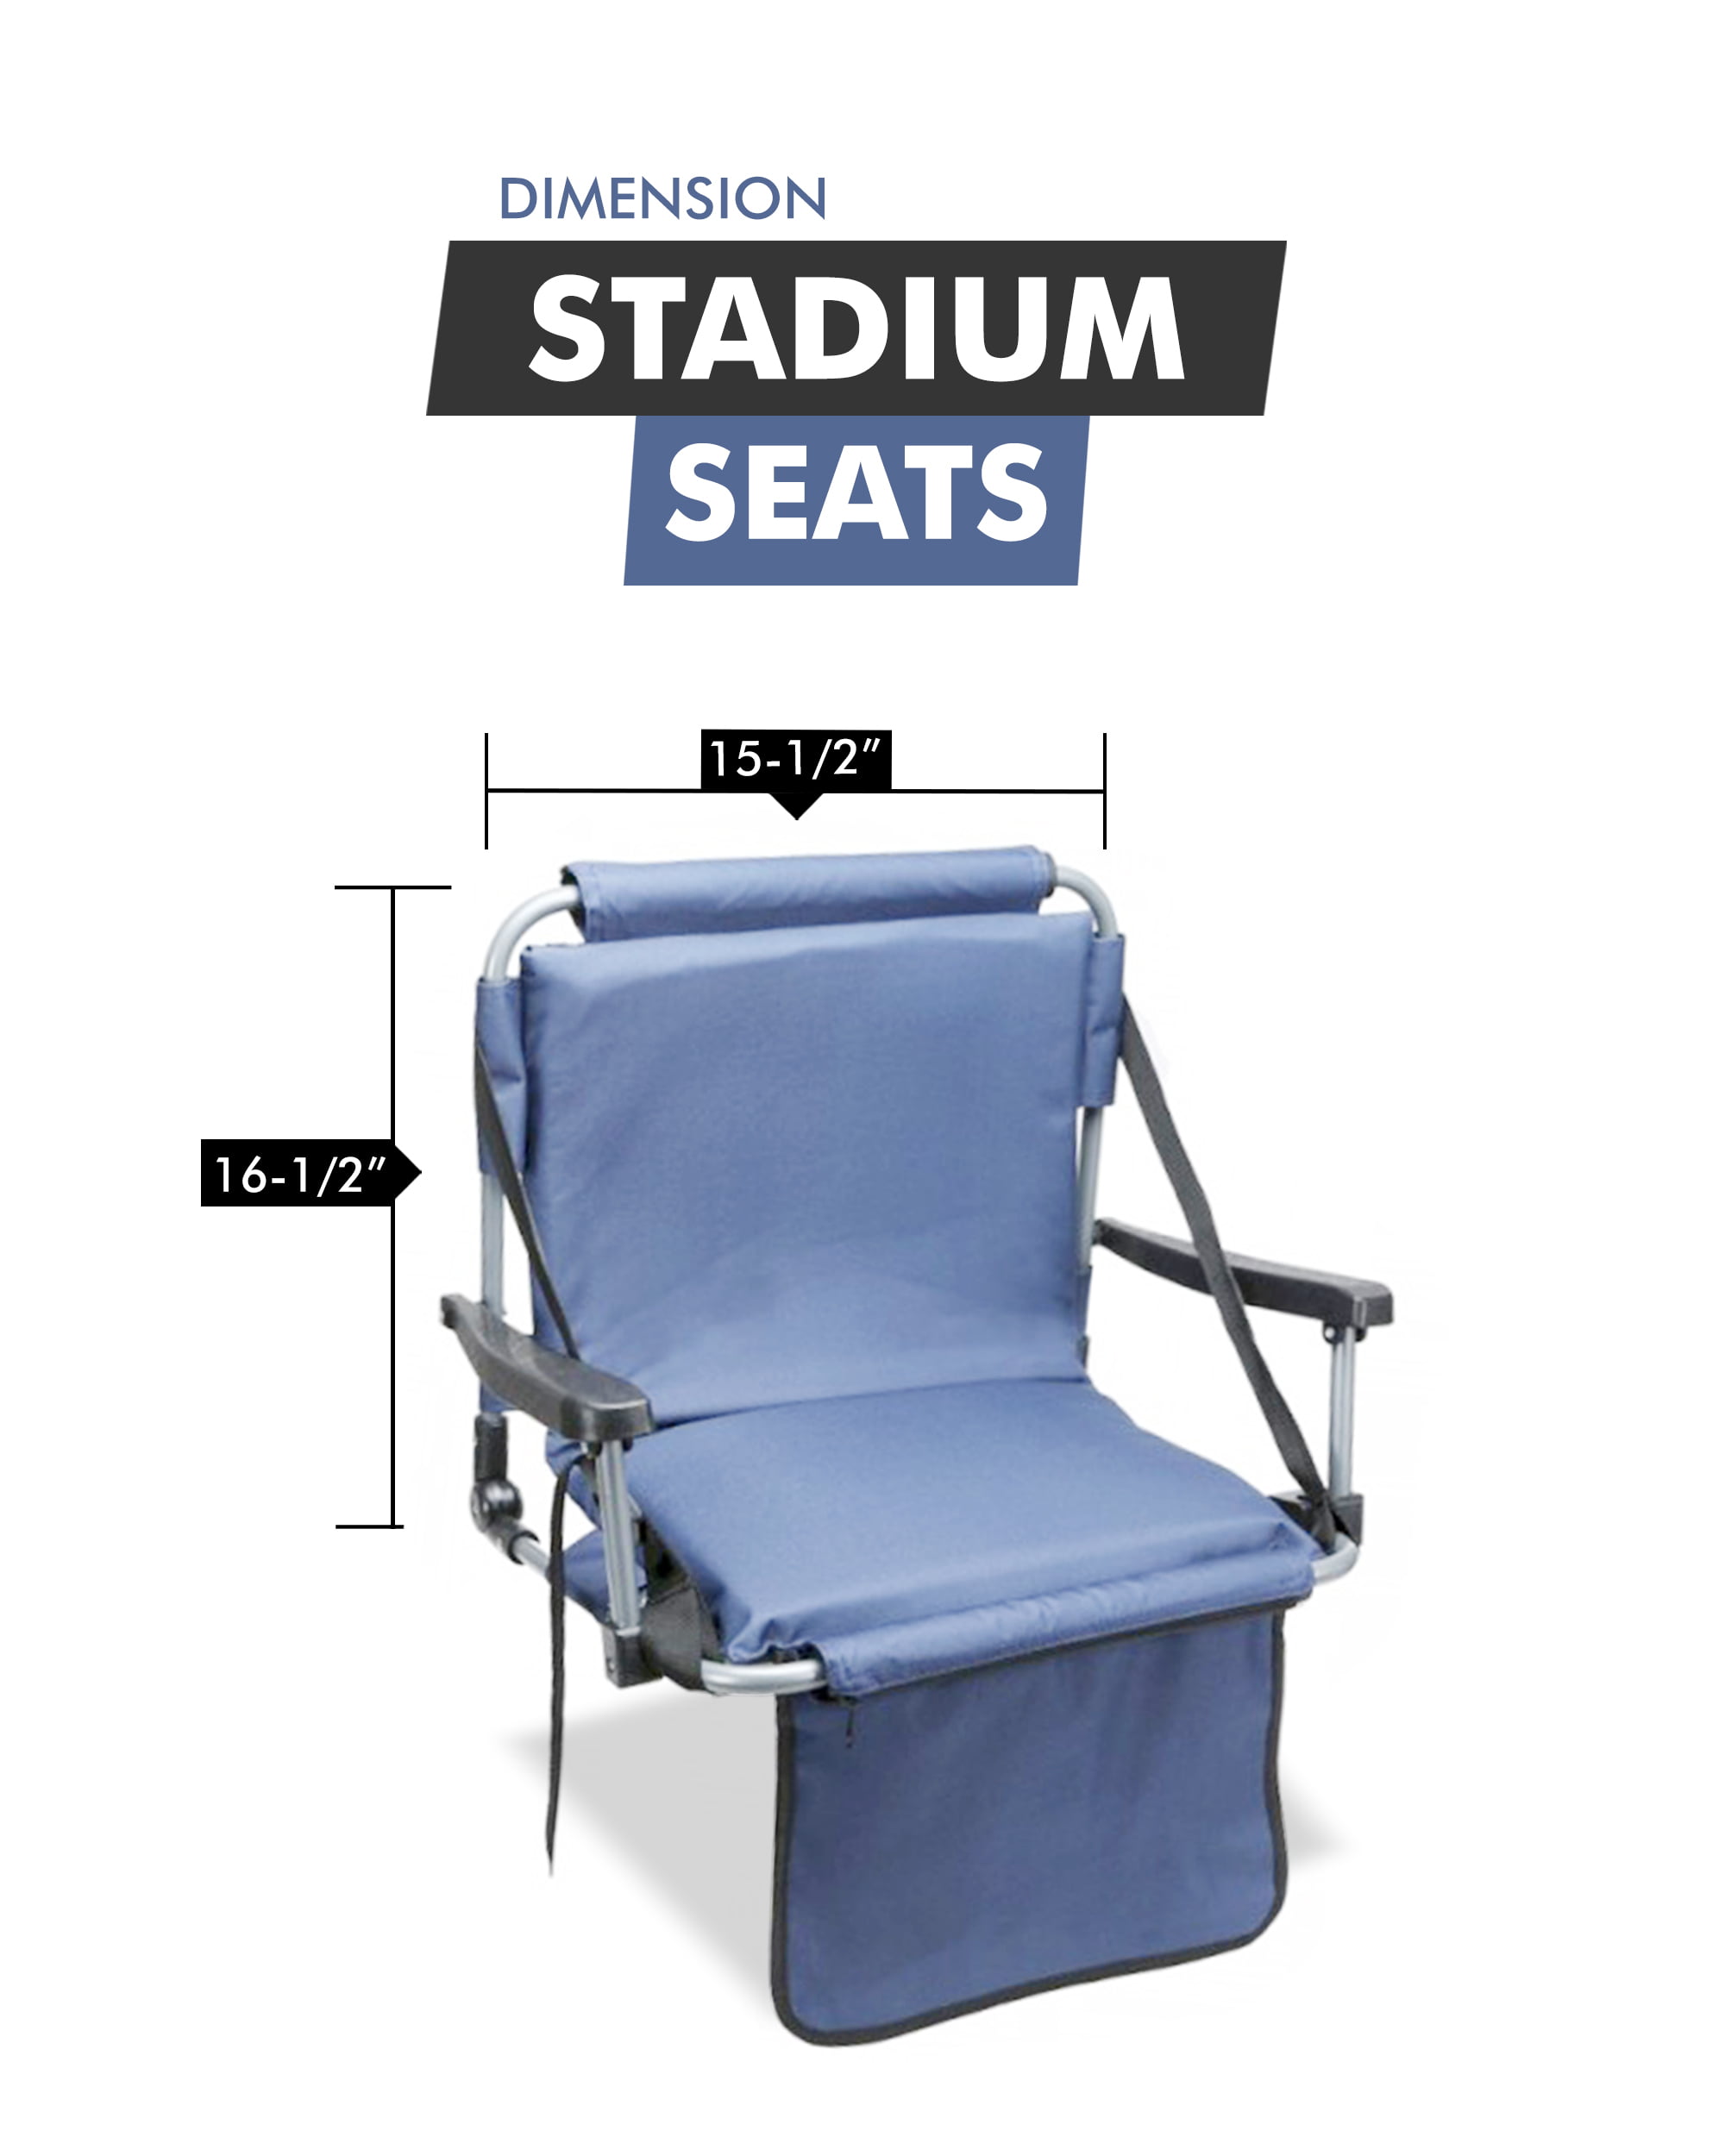 Arlmont & Co. Charnetta Folding Stadium Seat with Cushions